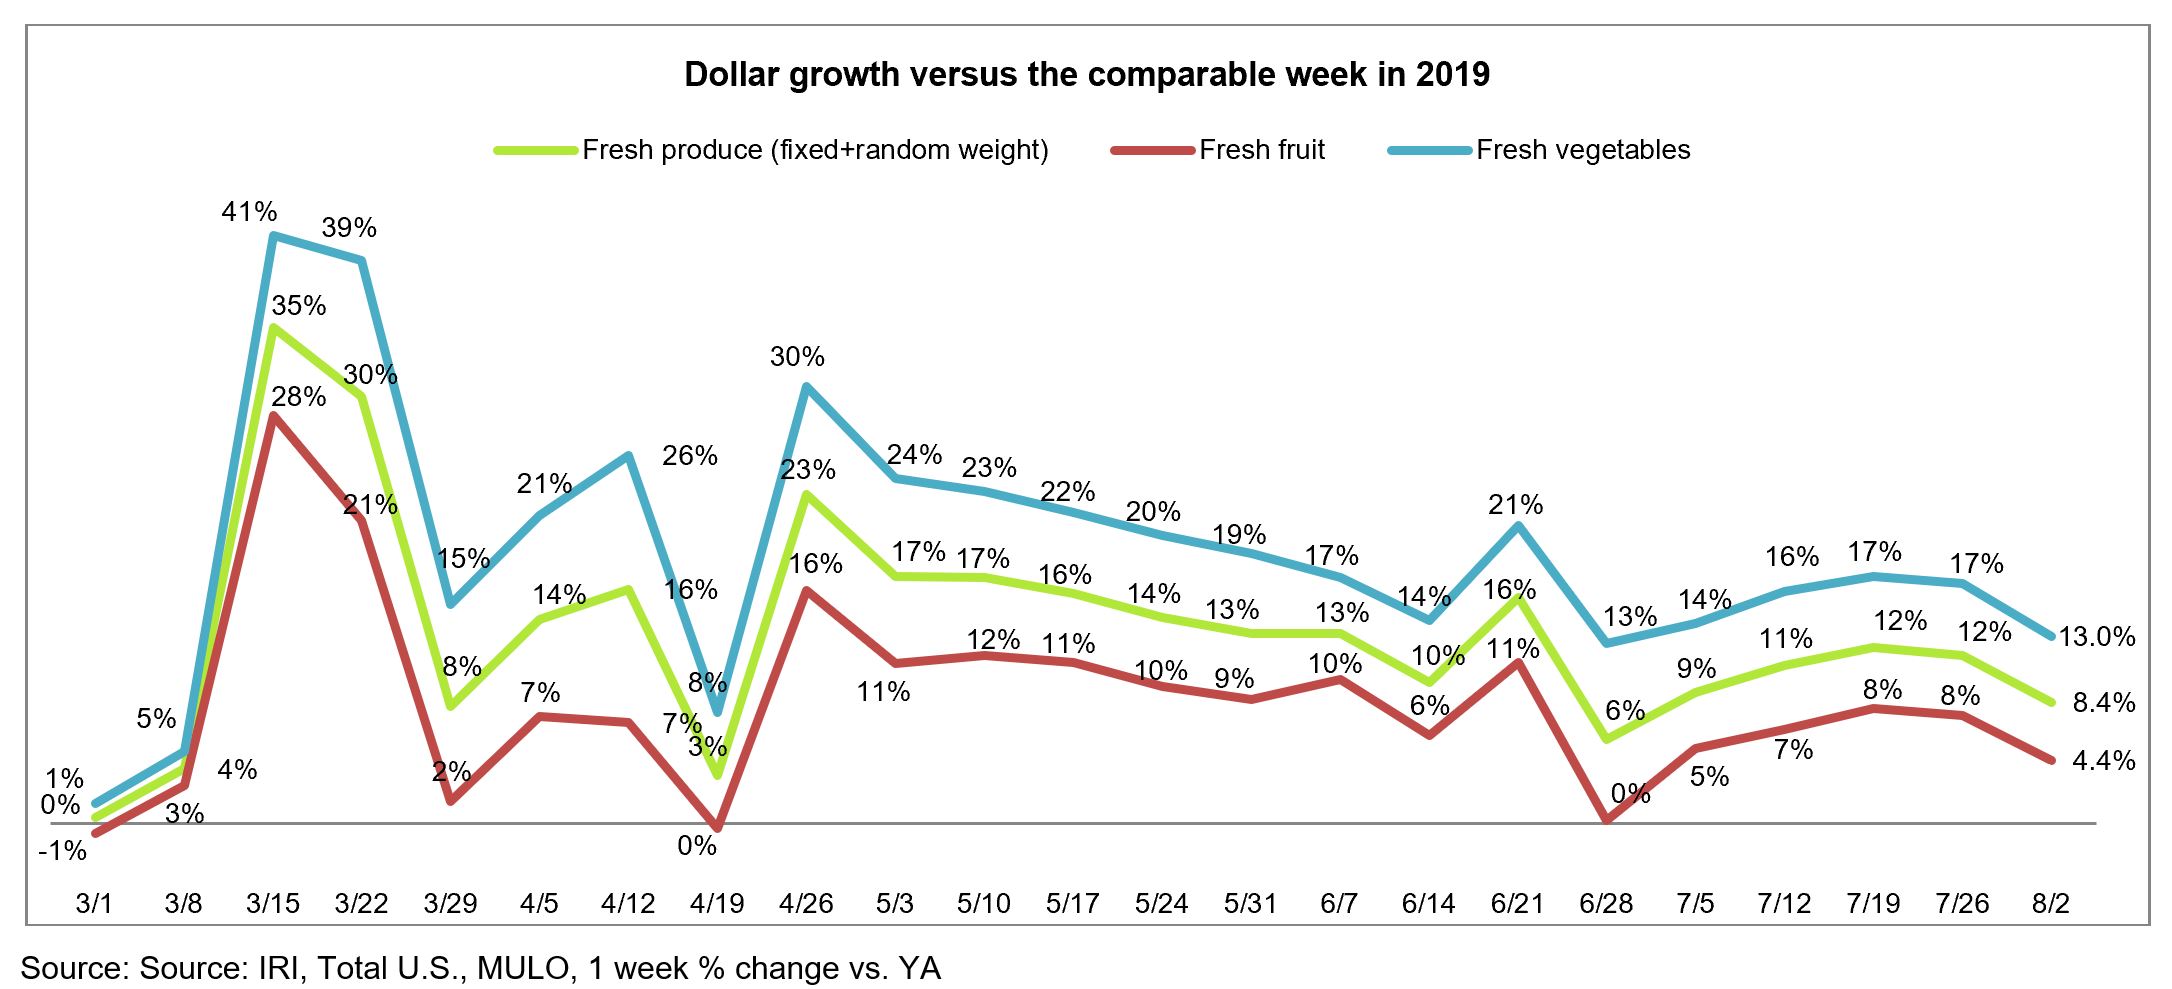 Line graph of dollar growth for fresh produce, fresh fruit, and fresh vegetables from March to August 2020 vs comparable week in 2019.